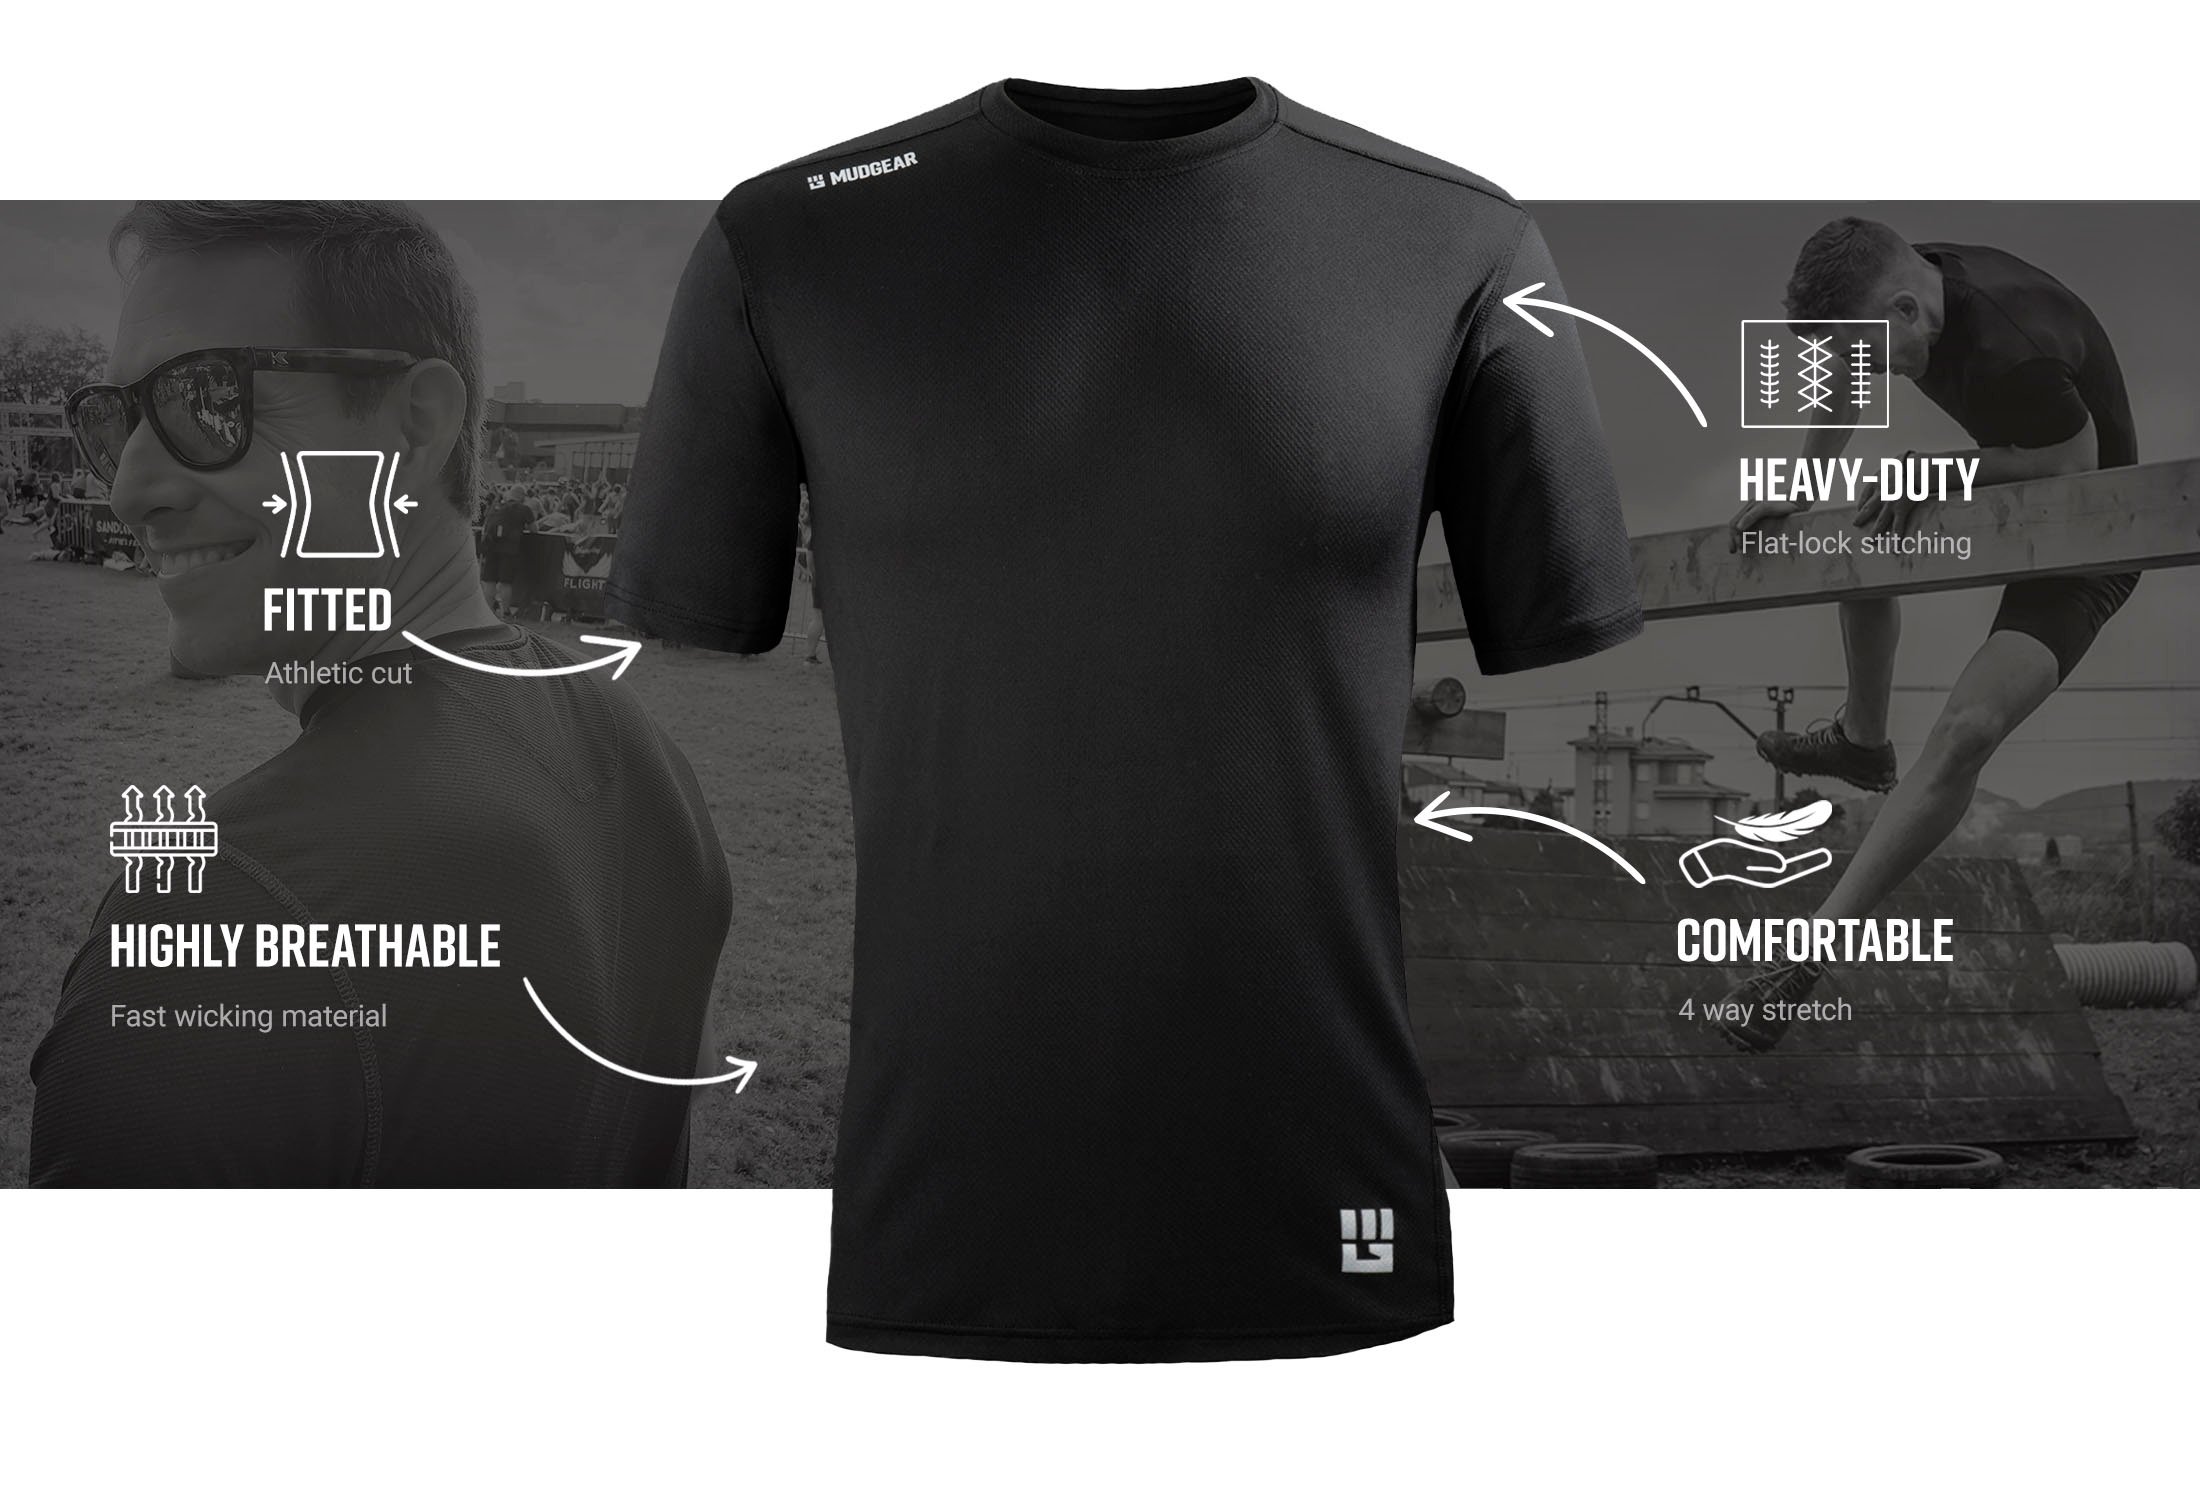 Infographic of Men's Fitted Performance Shirt VX - Short Sleeve (Black)